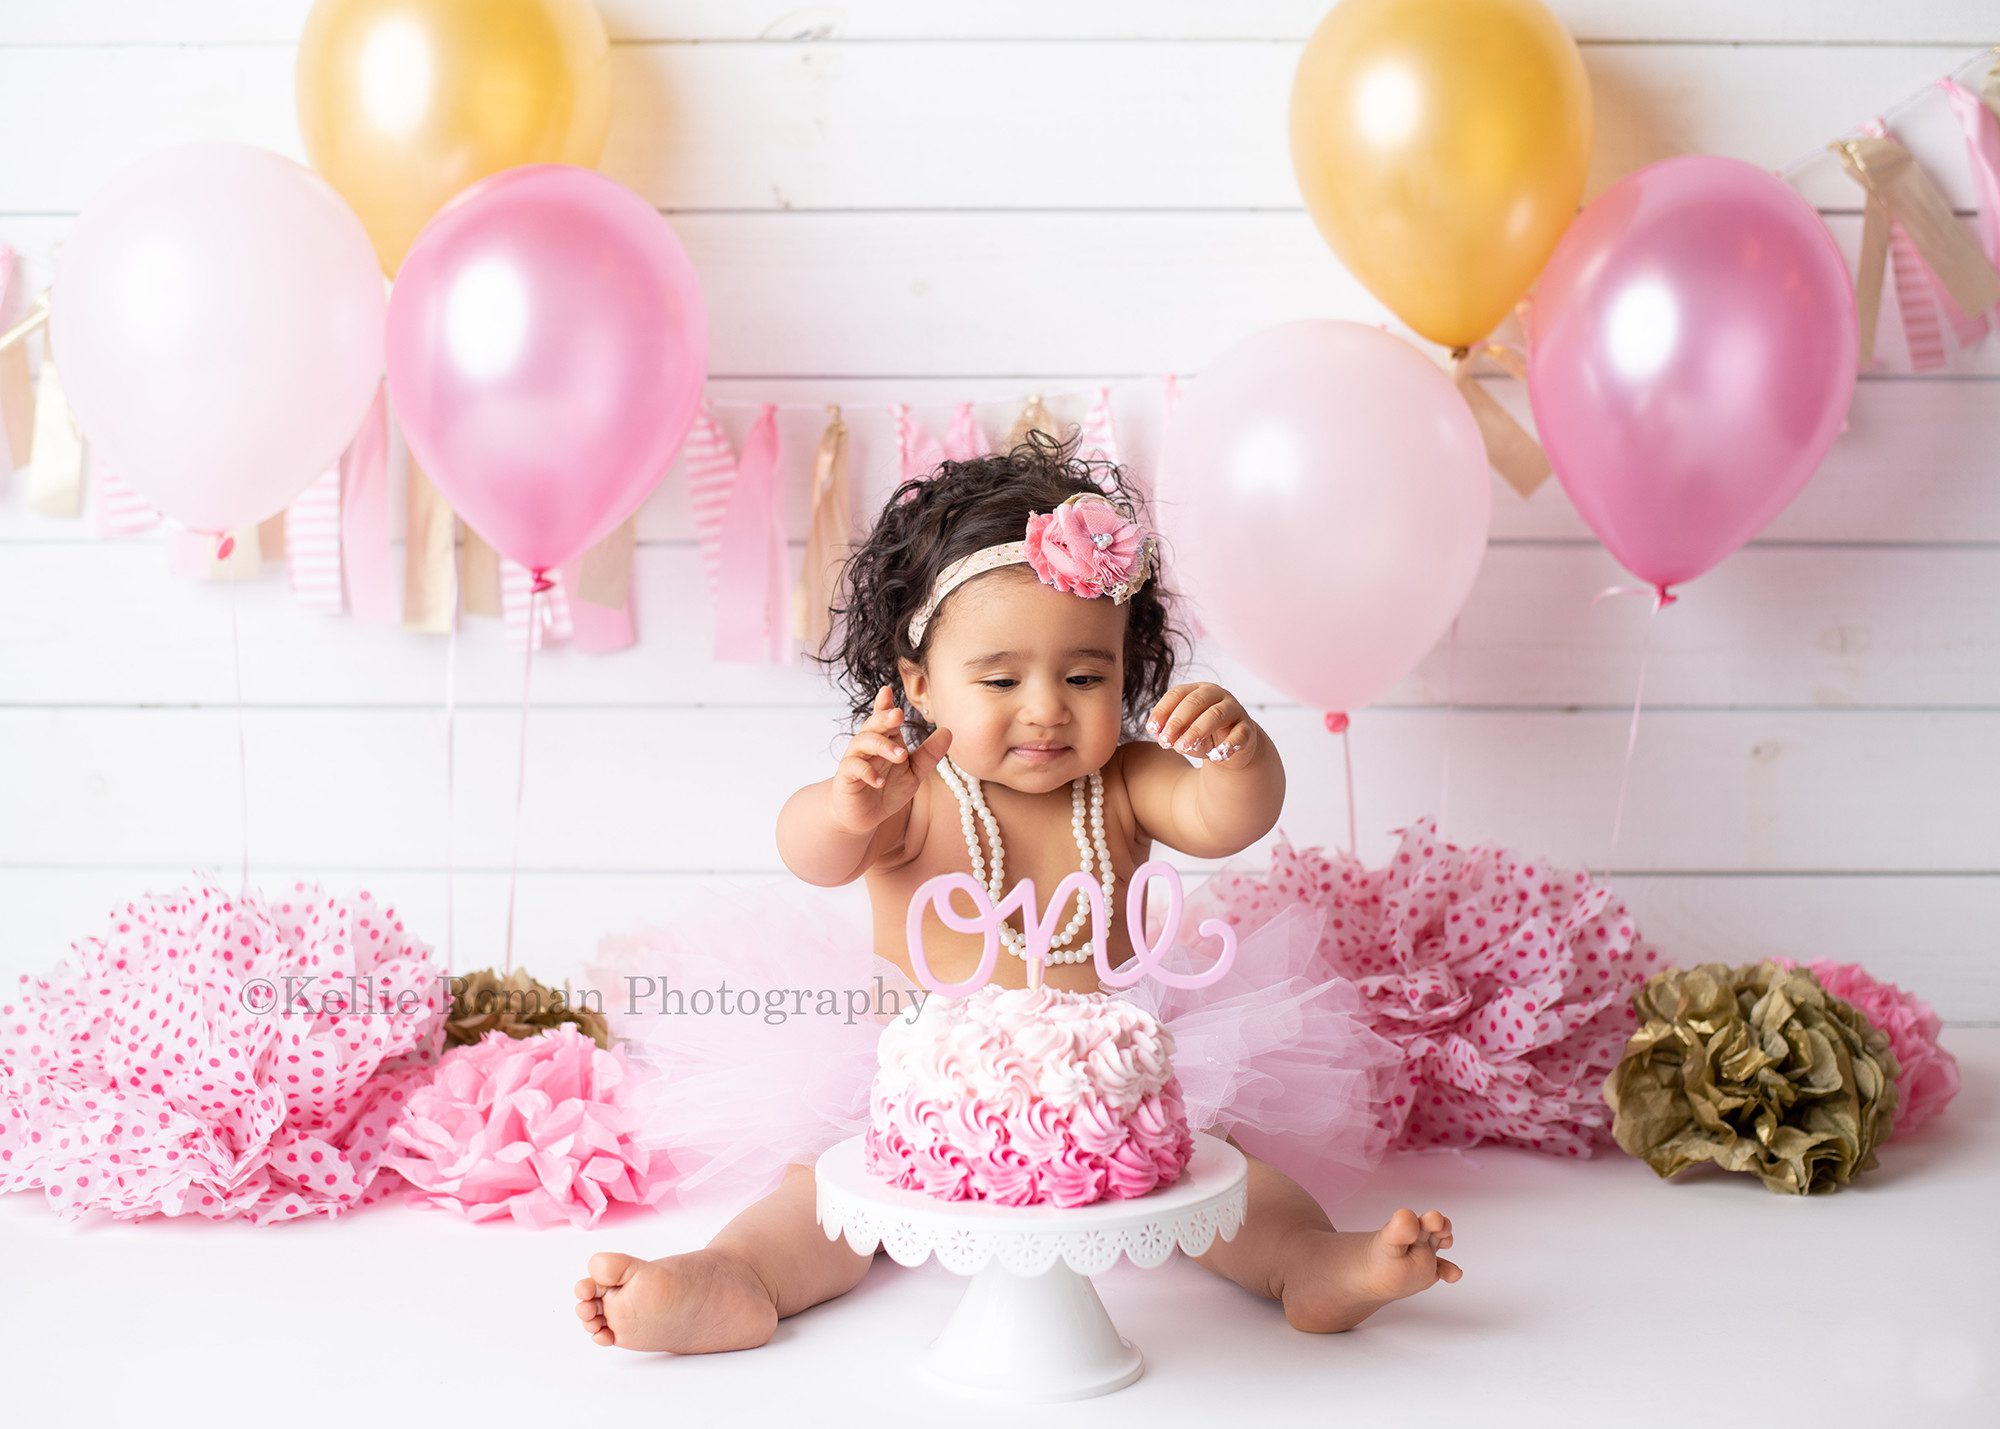 milwaukee cake smash photographer a one year old little girl in a milwaukee greendale photography studio sitting behind a ombre pink swirl cake on a white cake stand she's wearing a pink tutu with pearl necklaces and has her hands in the air she has pink pom poms behind her on the floor with gold and pink balloons and a gold and pink banner